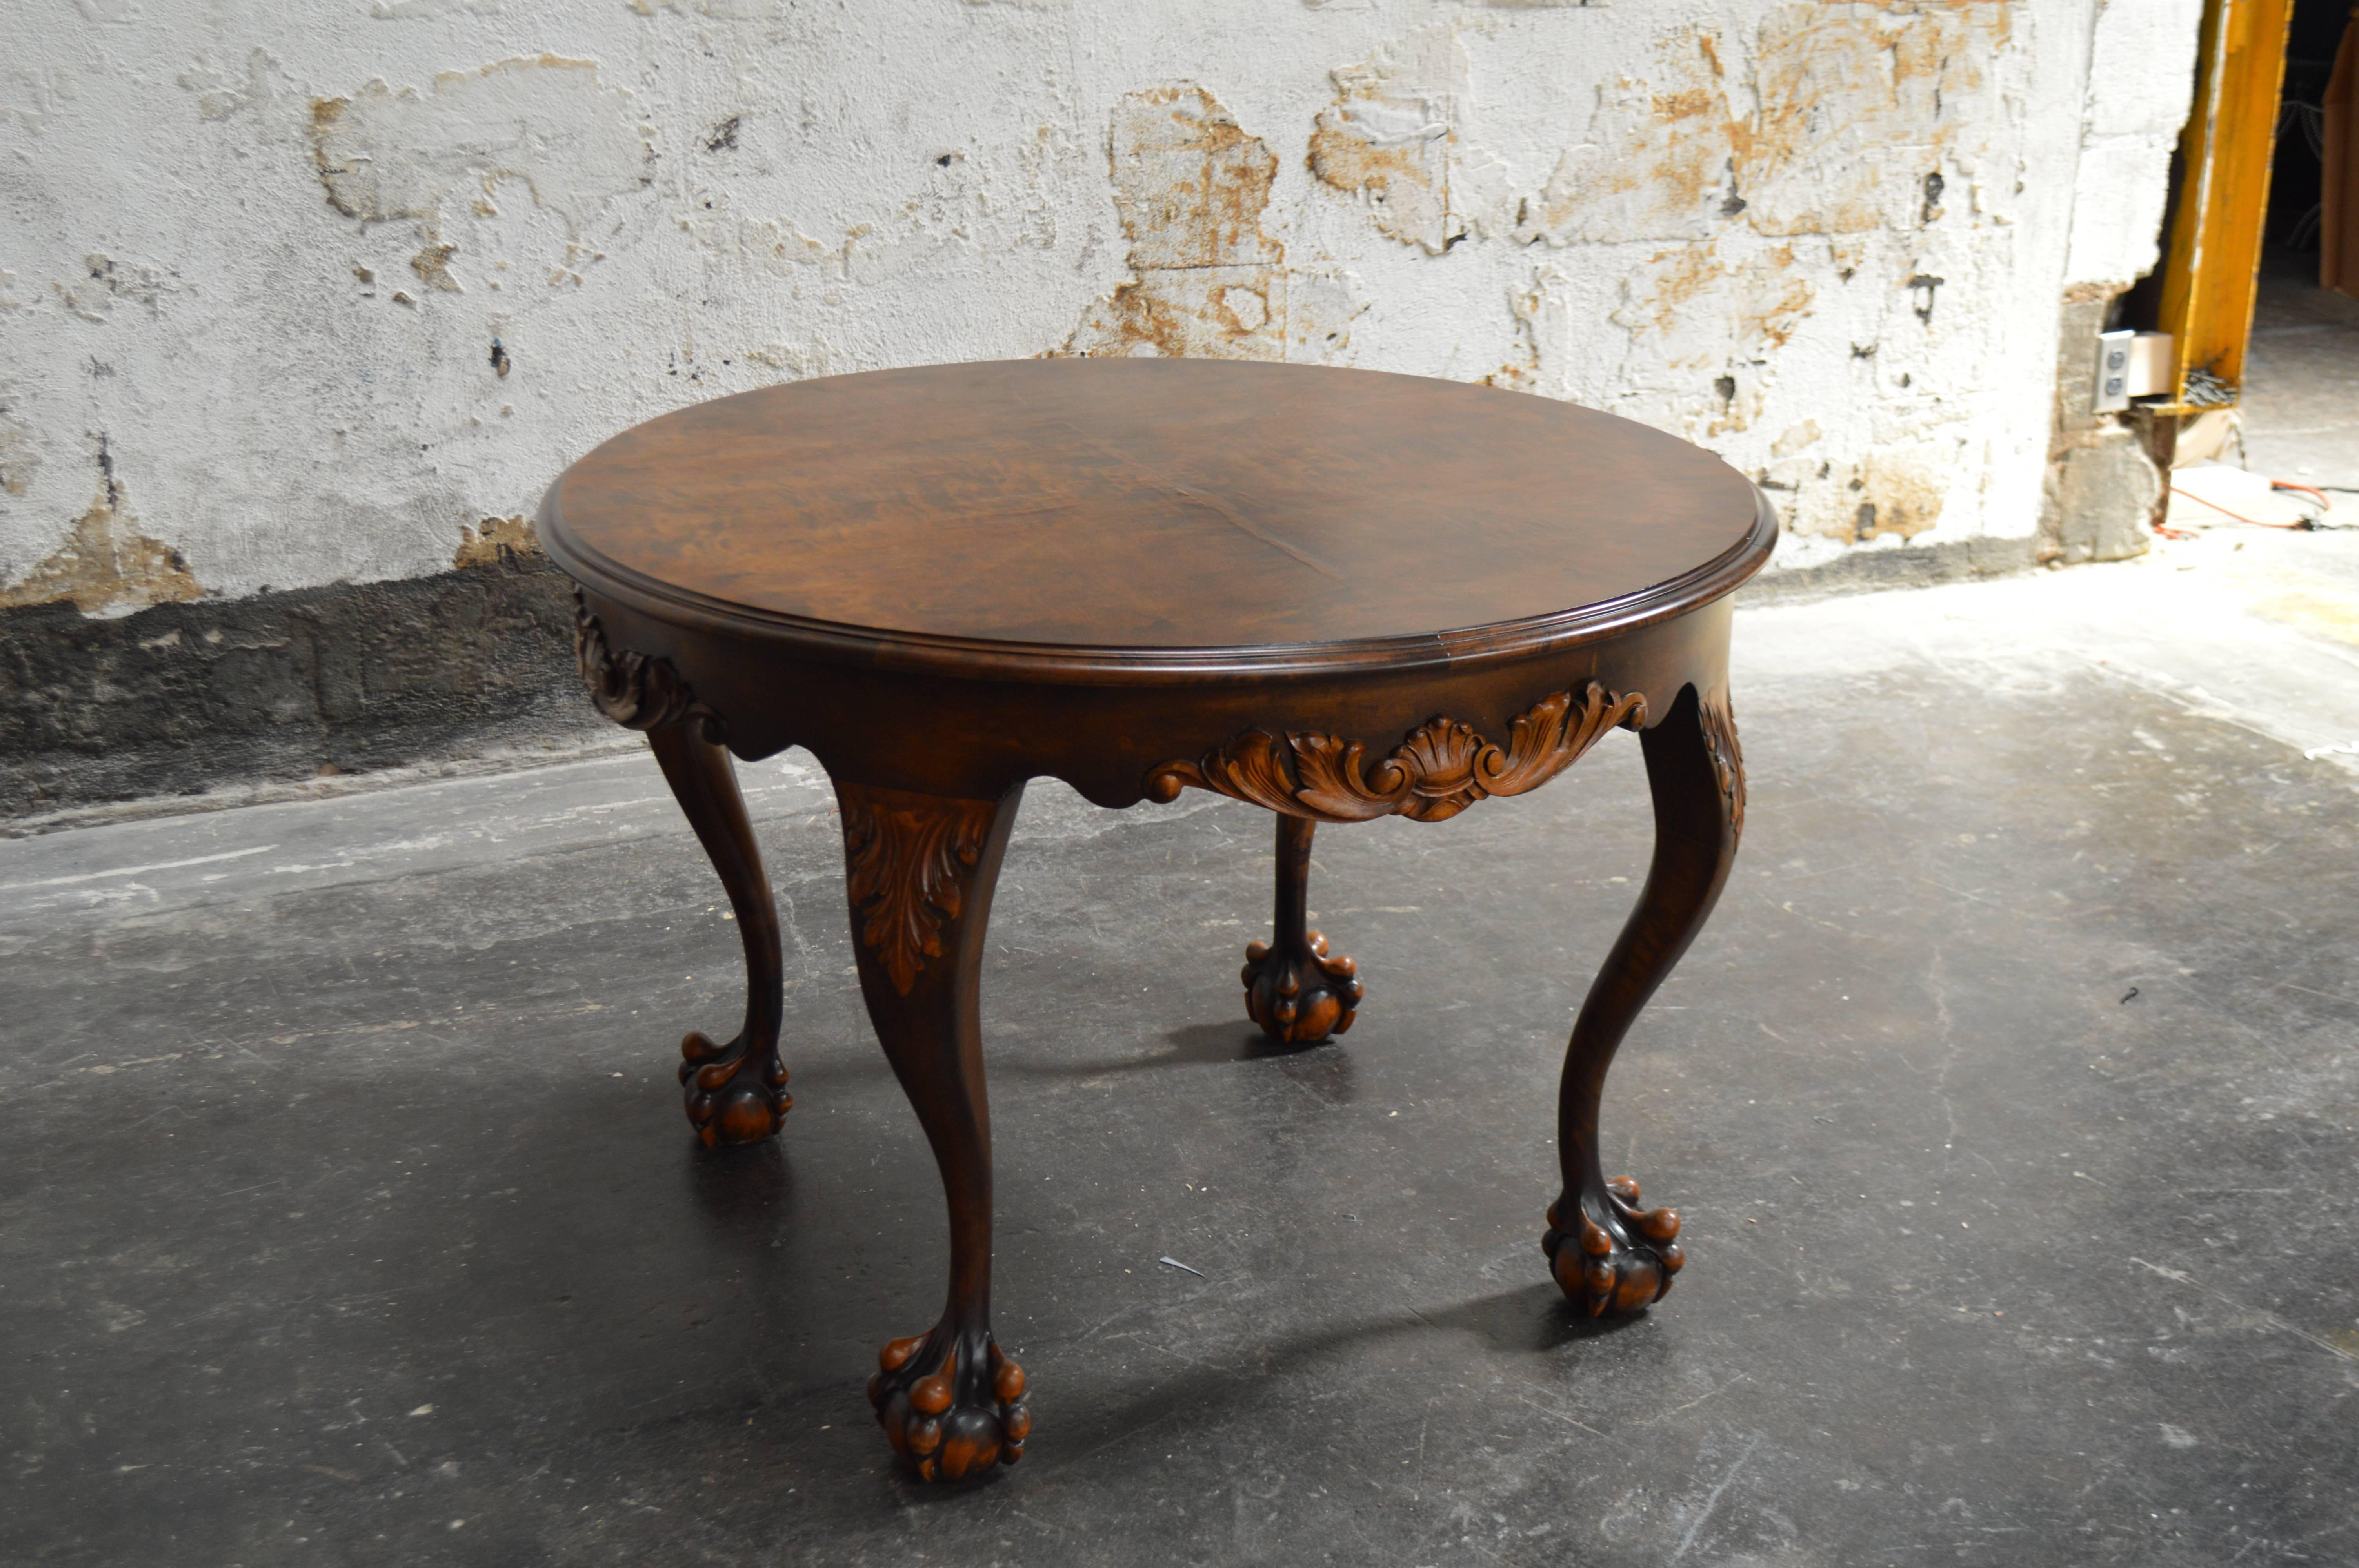 A handsome flame birch side table of mid-18th century design with elaborately executed trim and lightly shaped cabriole legs with scrolls carving terminating in high ball in claw feet. This table has been restored by our in-house craftsmen. There